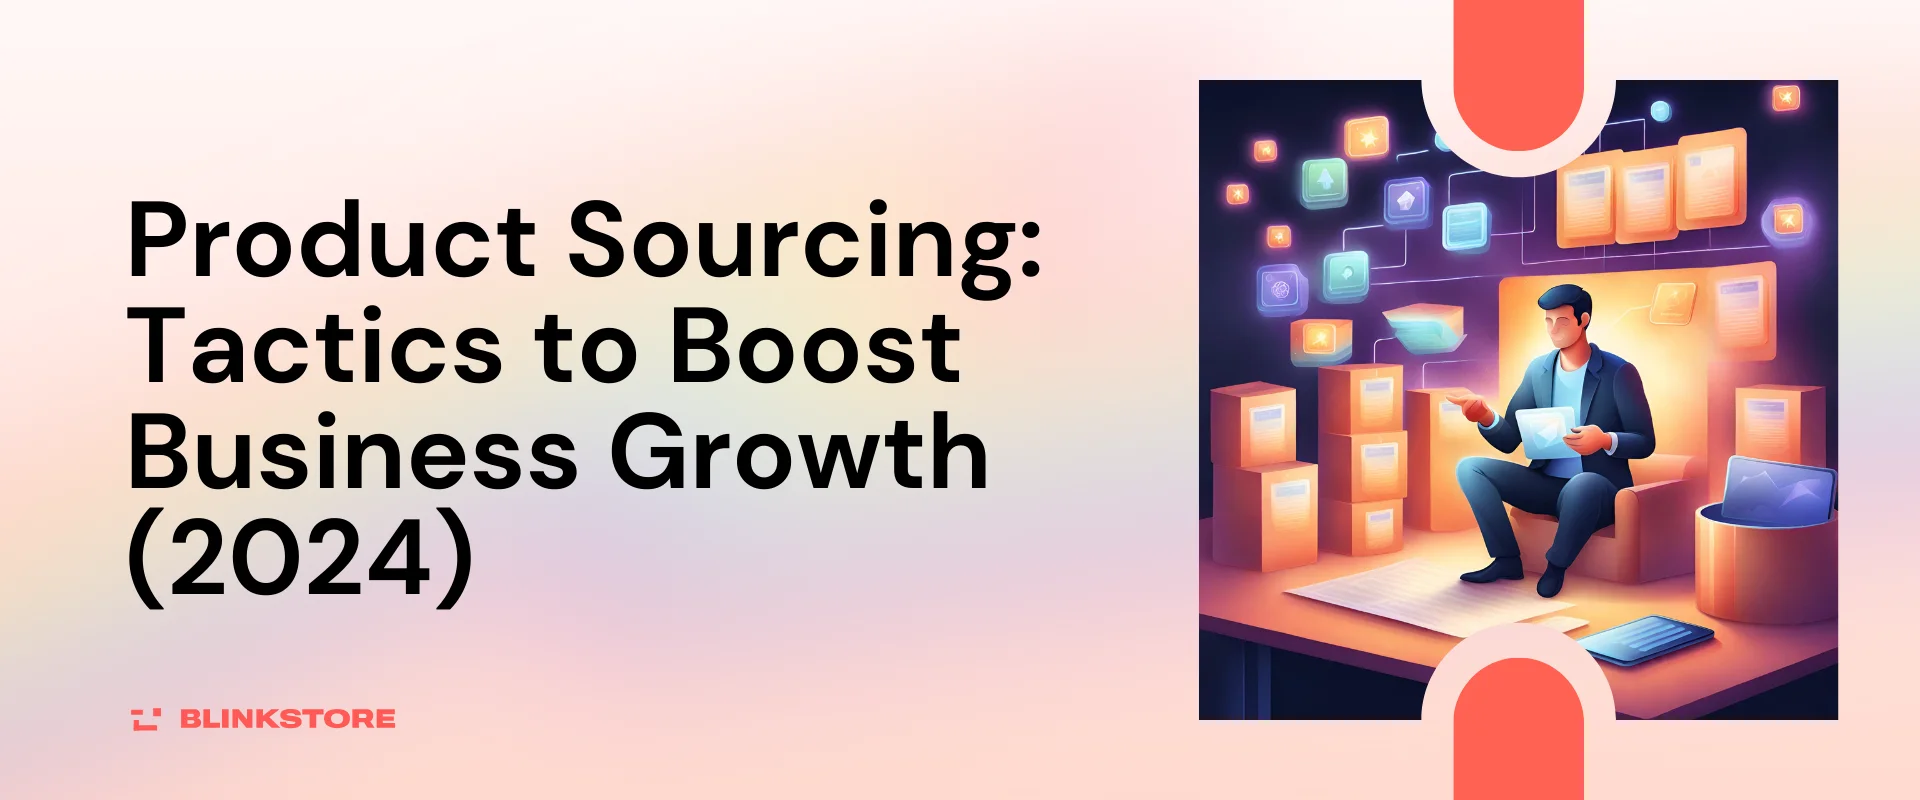 Product Sourcing: Tactics to Boost Business Growth (2024)